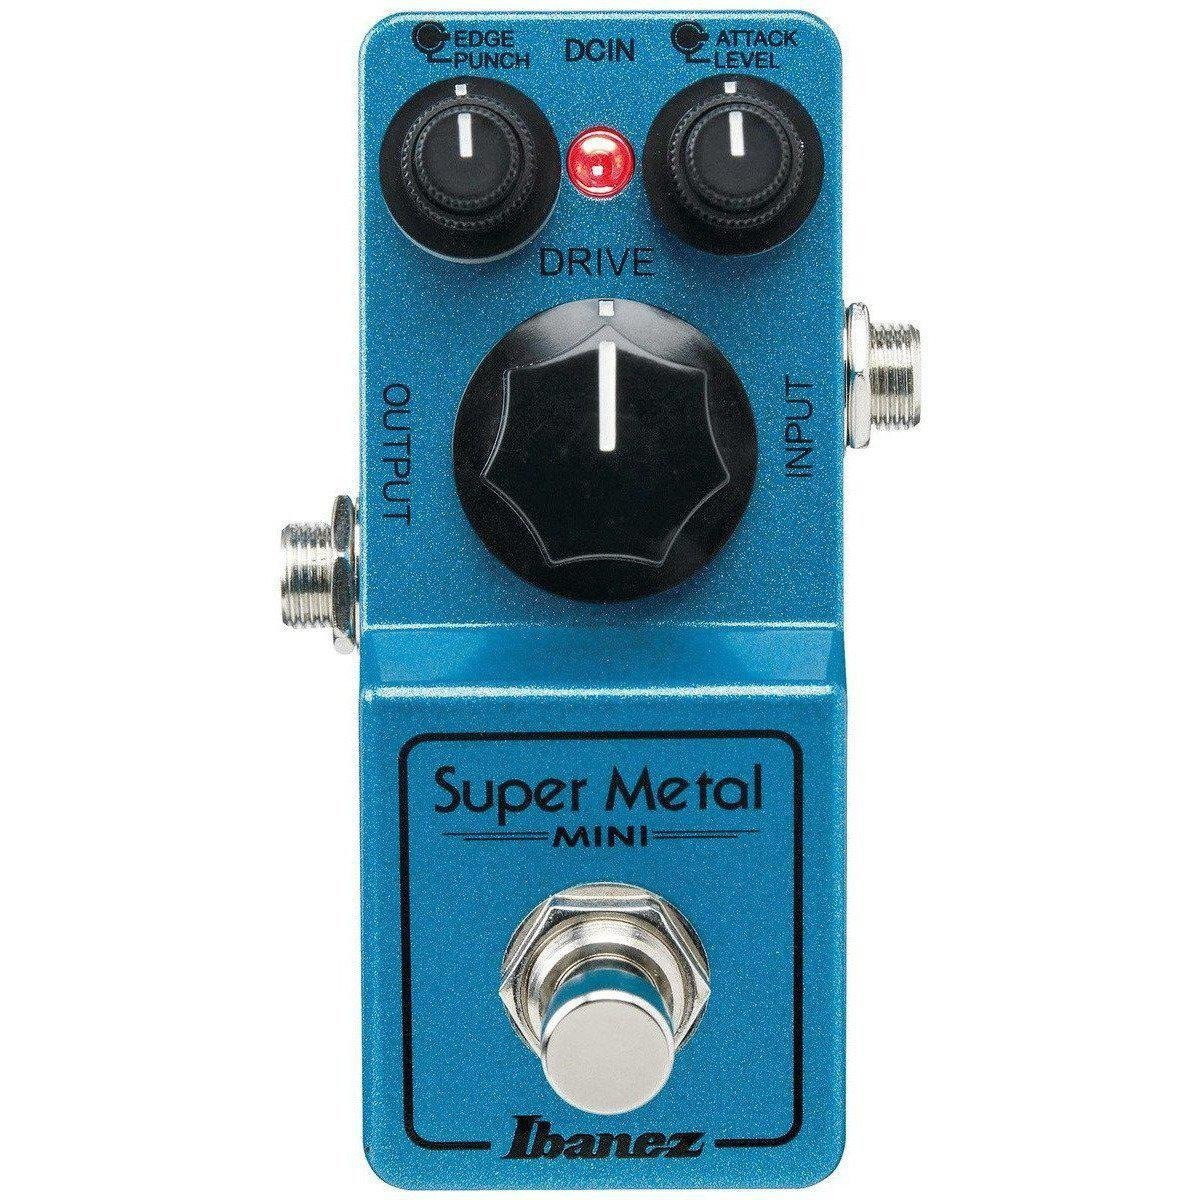 IBANEZ SM MINI Super Metal Distortion Pedal-Andy's Music